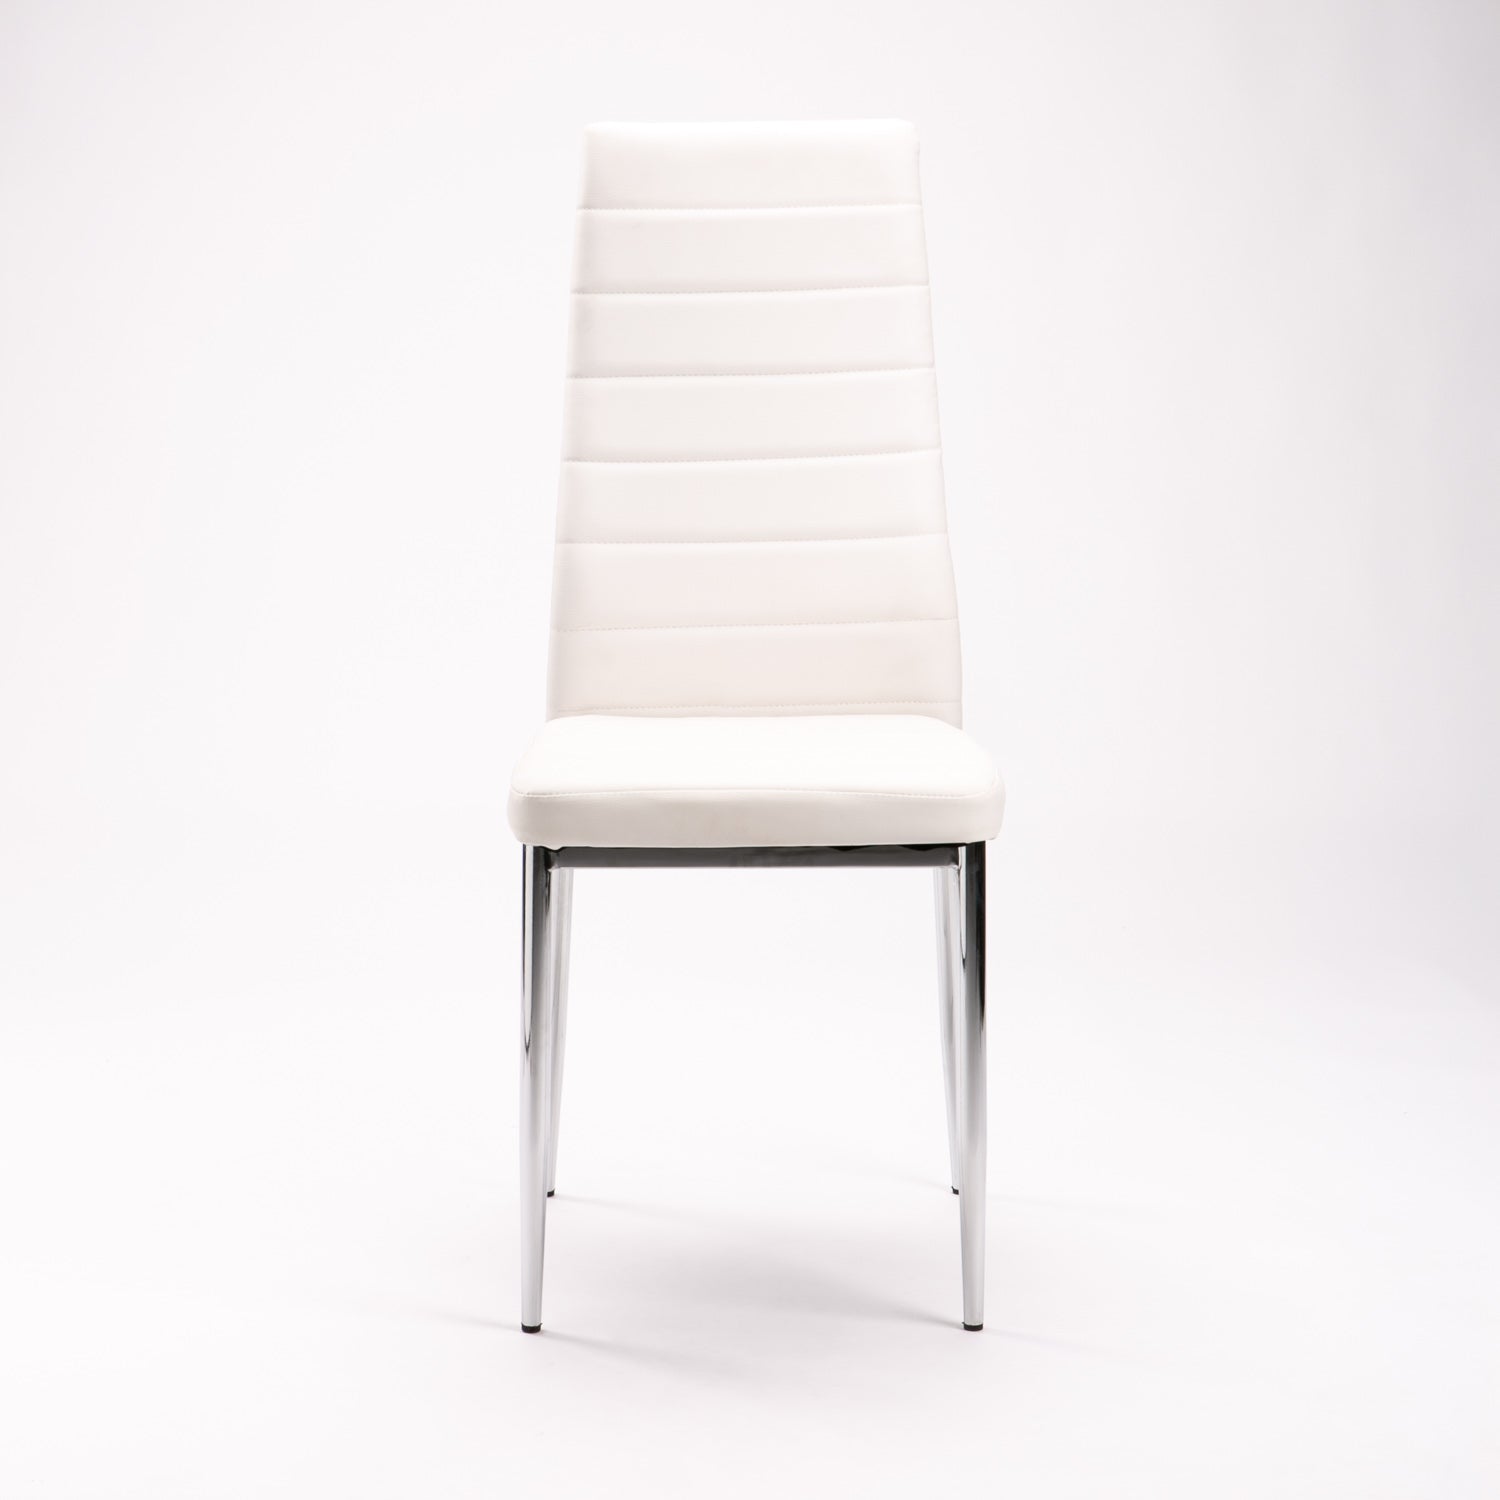 Desre Leather Chome Chair